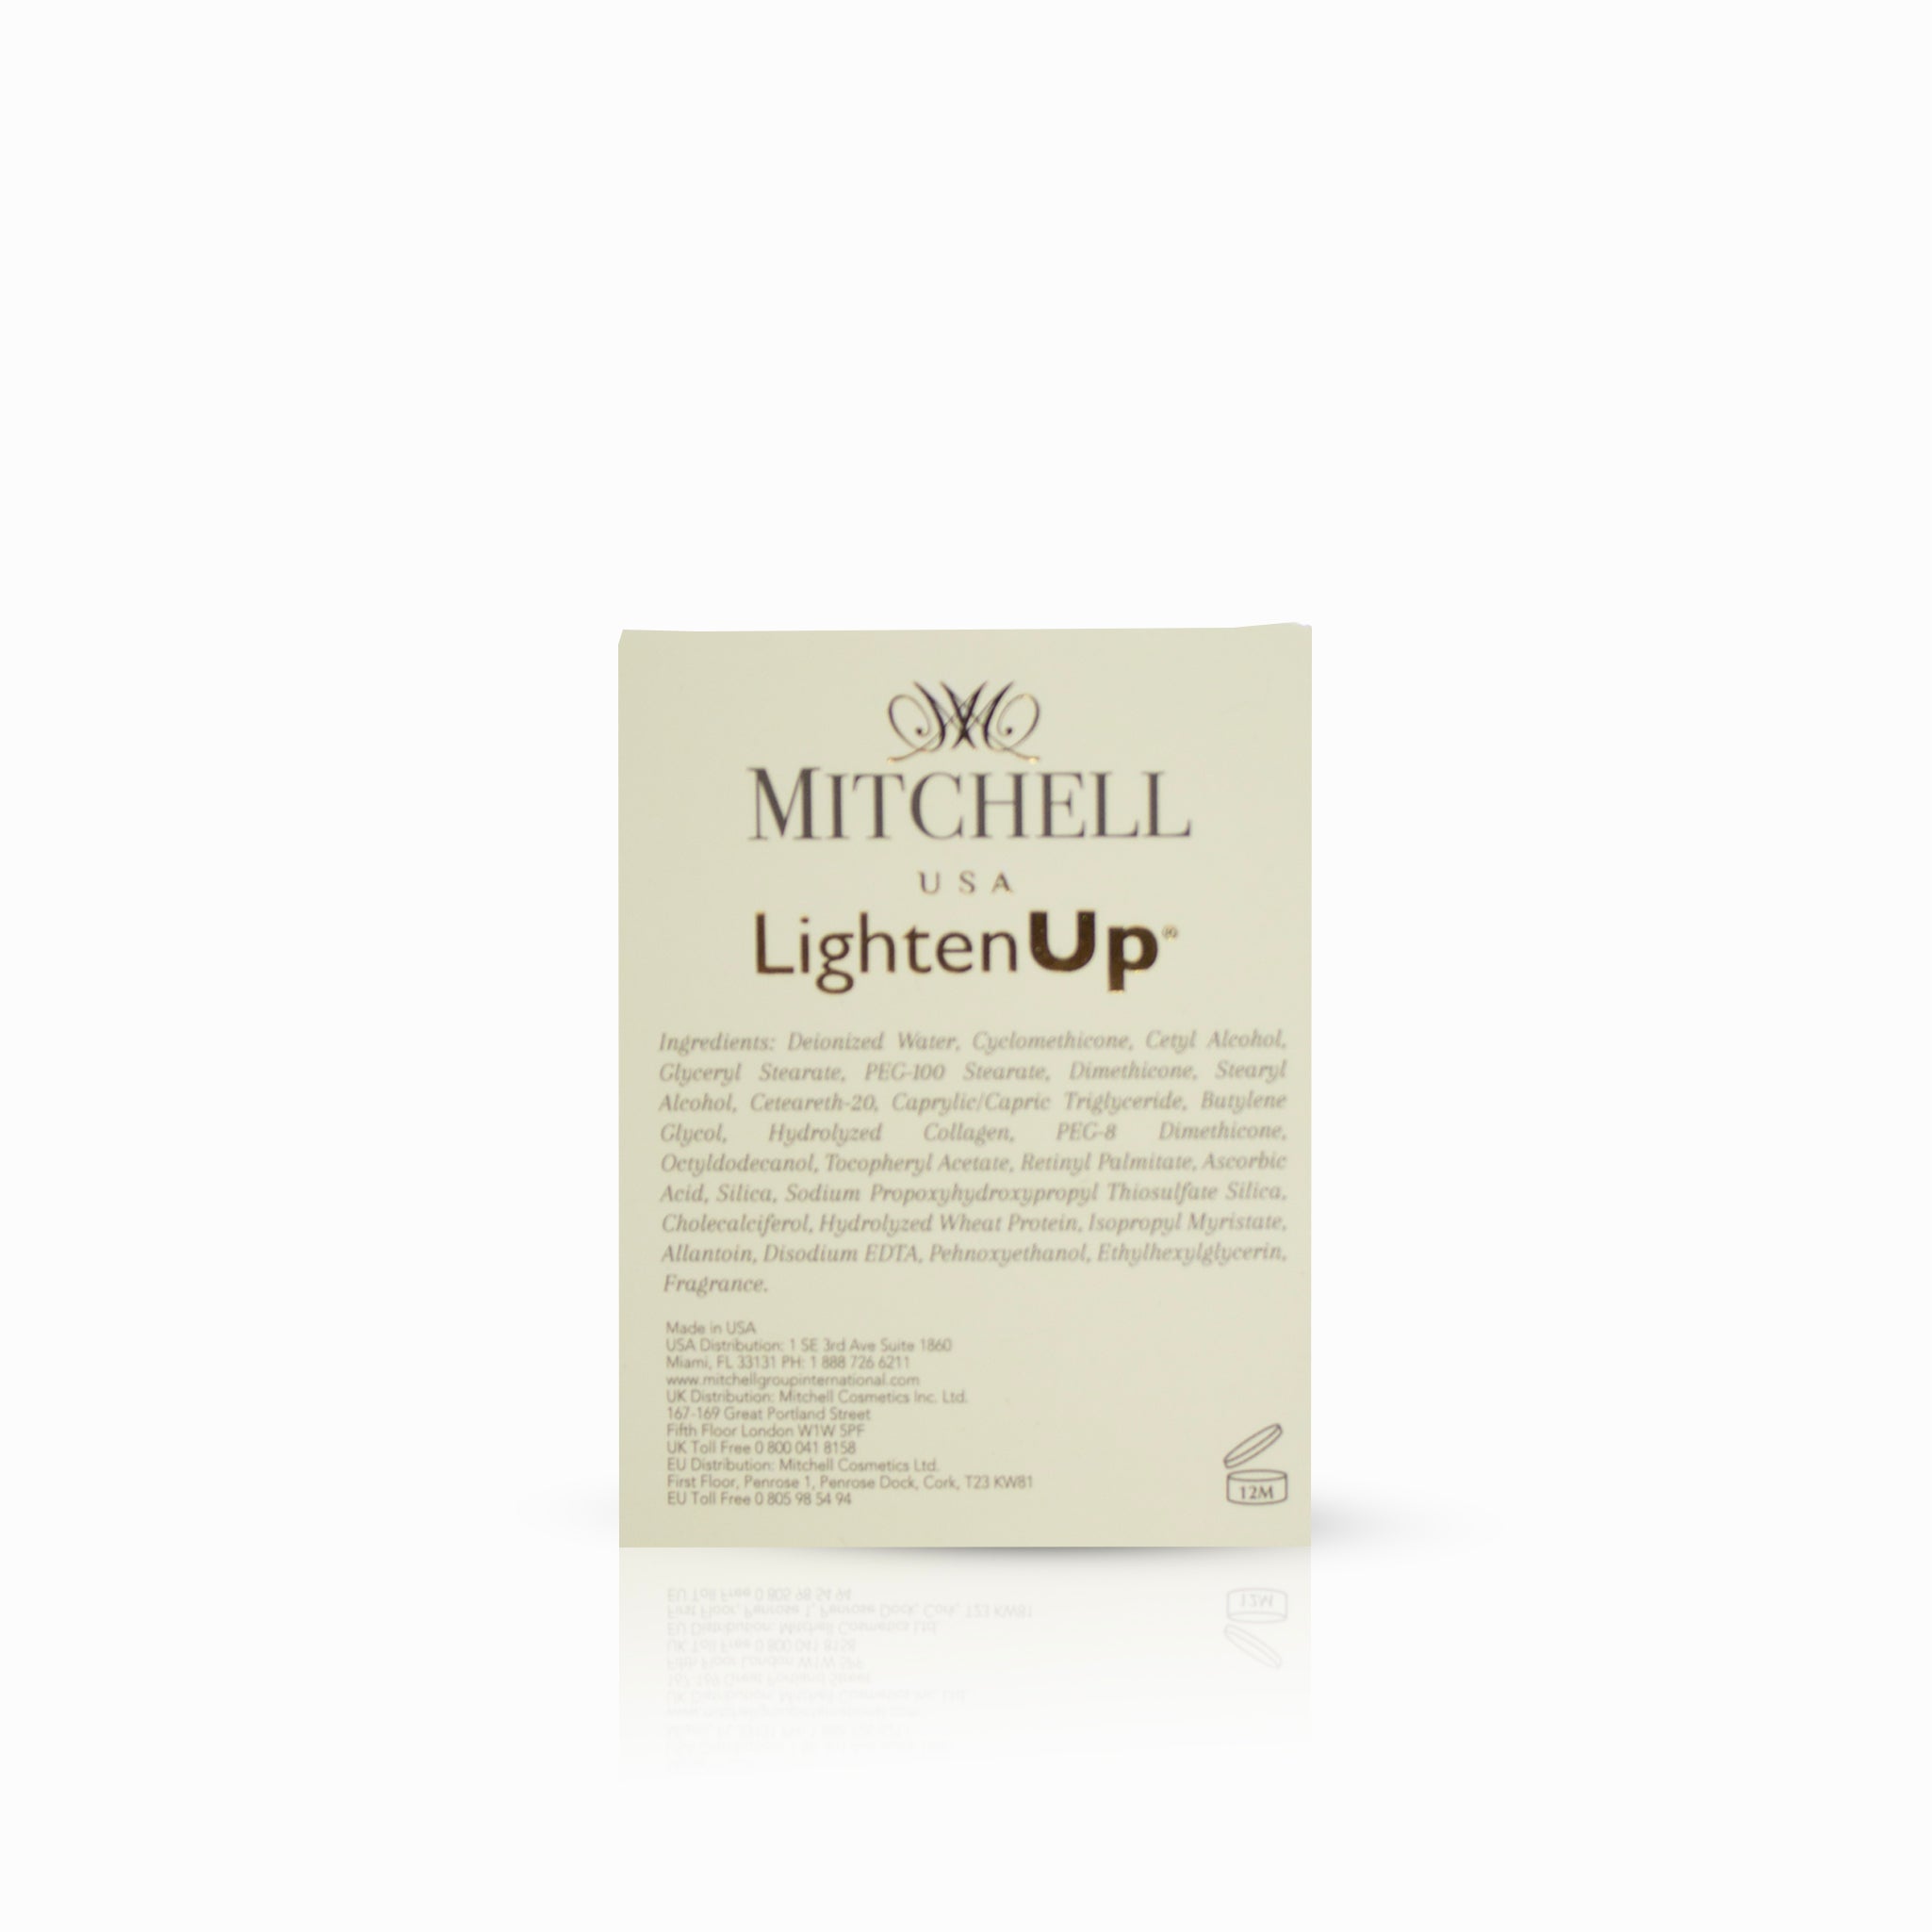 LightenUp Anti-Aging Collagen Face Cream 30ml Mitchell Brands - Mitchell Brands - Skin Lightening, Skin Brightening, Fade Dark Spots, Shea Butter, Hair Growth Products